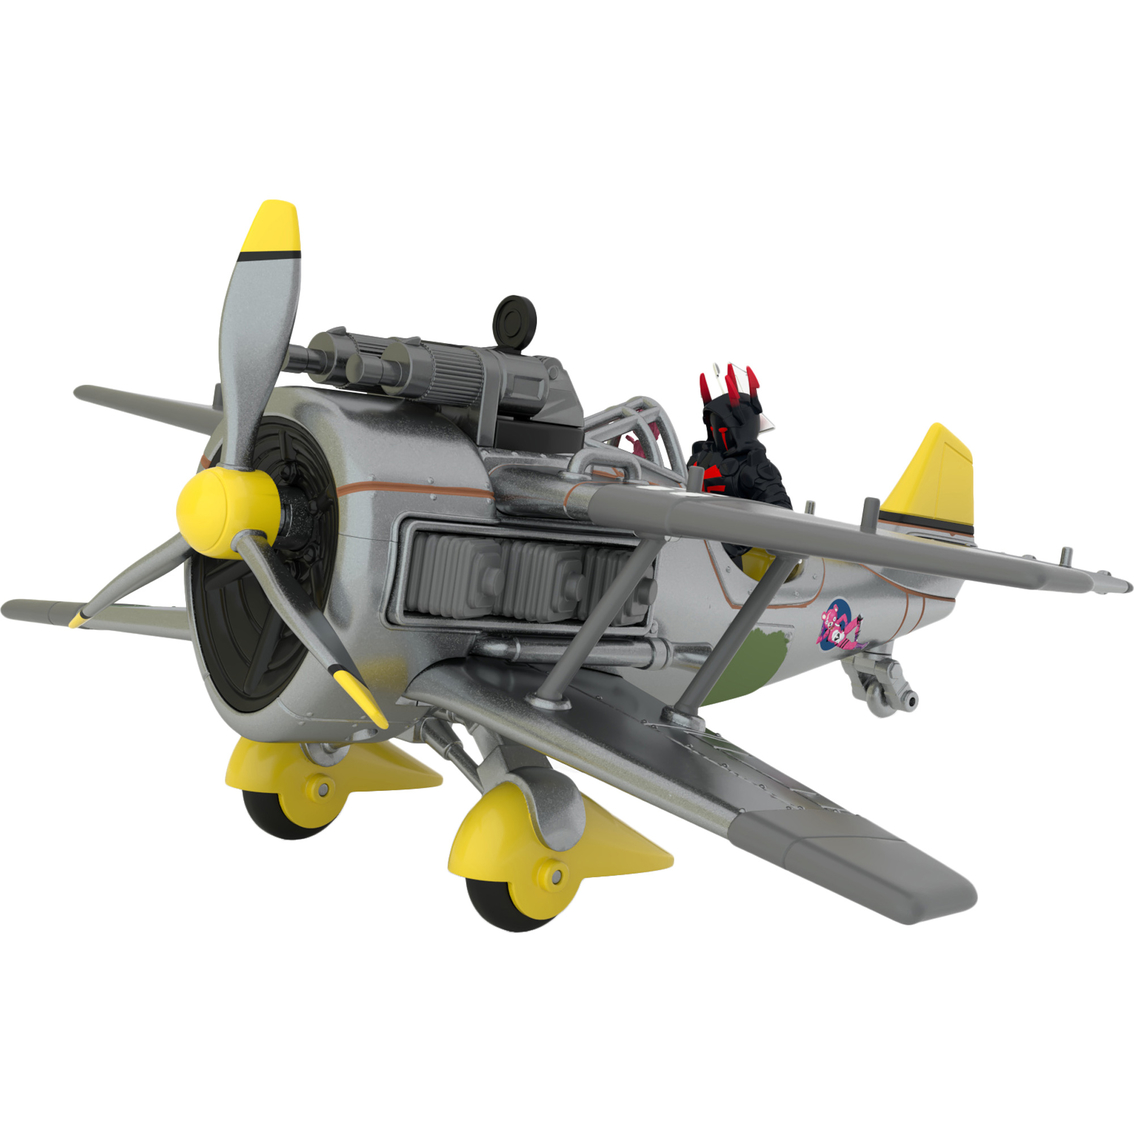 Moose Toys Fortnite Battle Royale Collection X-4 Stormwing Toy Plane - Image 2 of 5